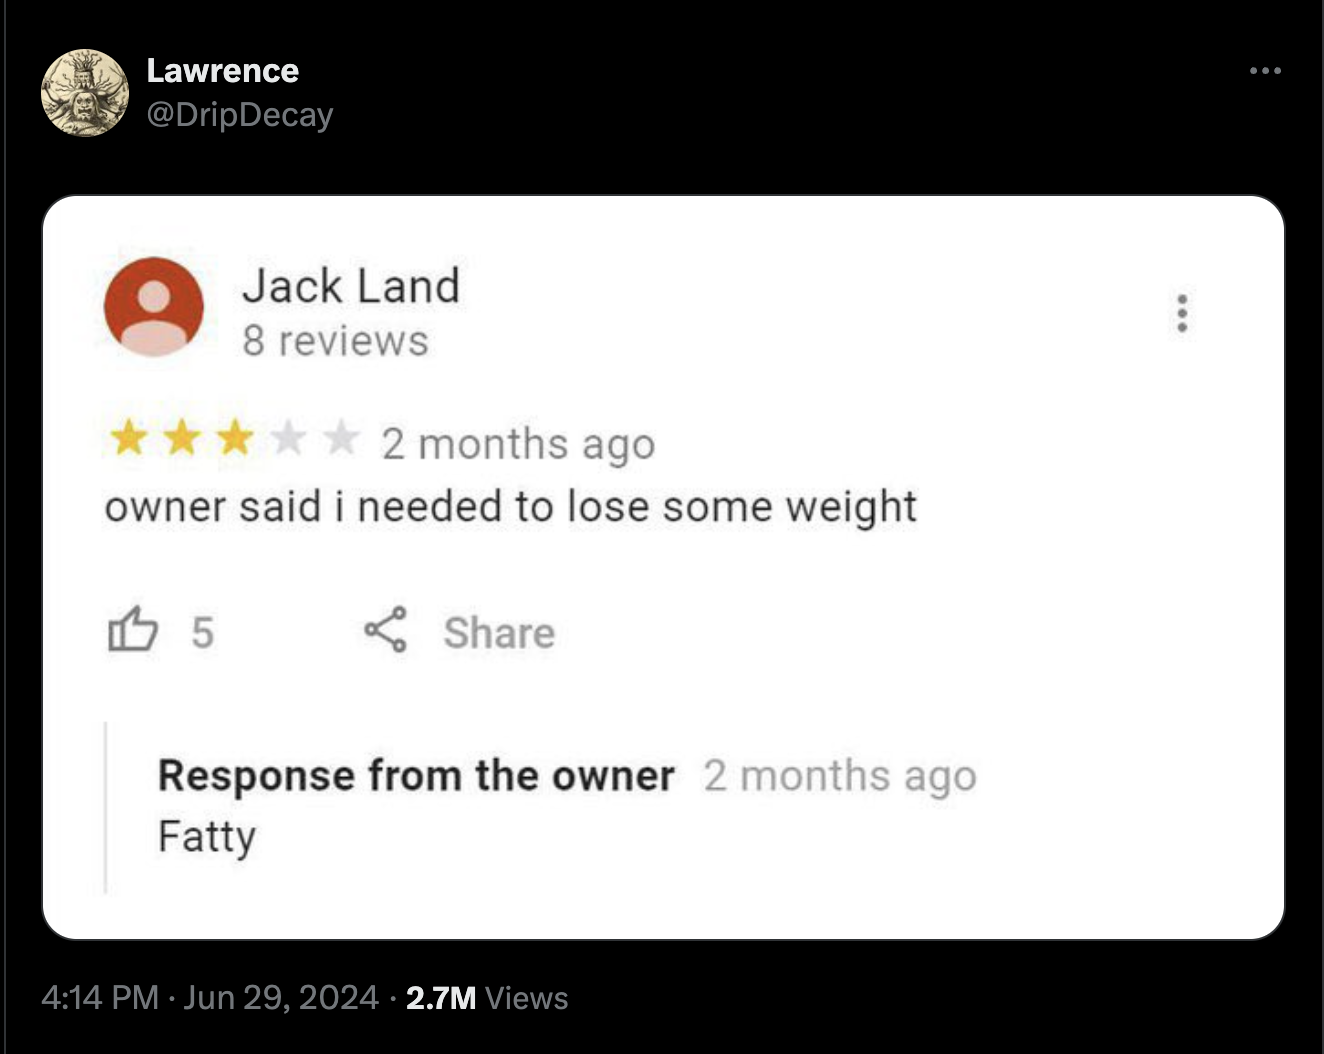 screenshot - Lawrence Decay Jack Land 8 reviews 2 months ago owner said i needed to lose some weight 5 Response from the owner 2 months ago Fatty 2.7M Views